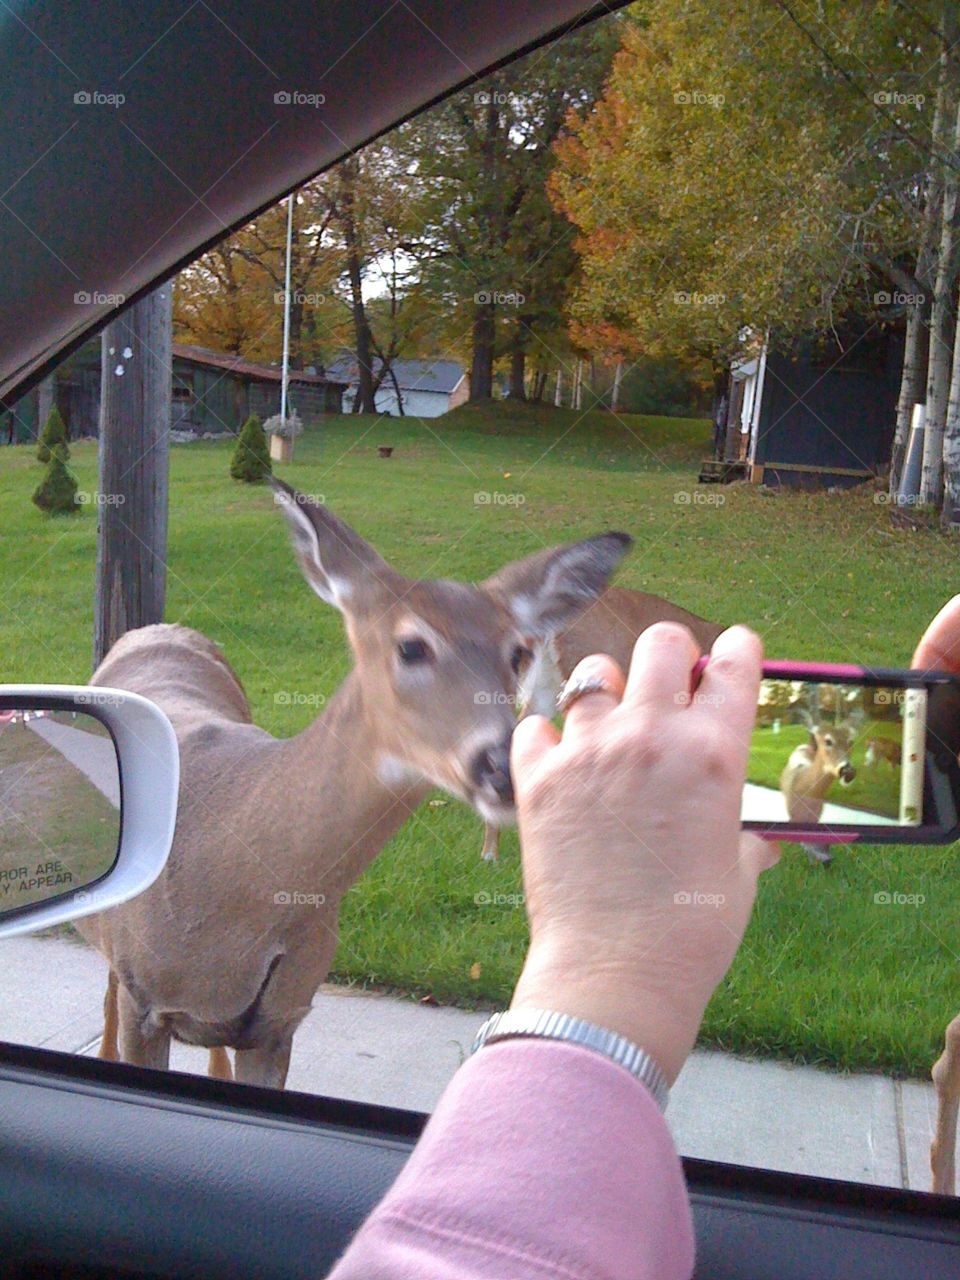 Picture of someone taking a picture of a deer, close-up